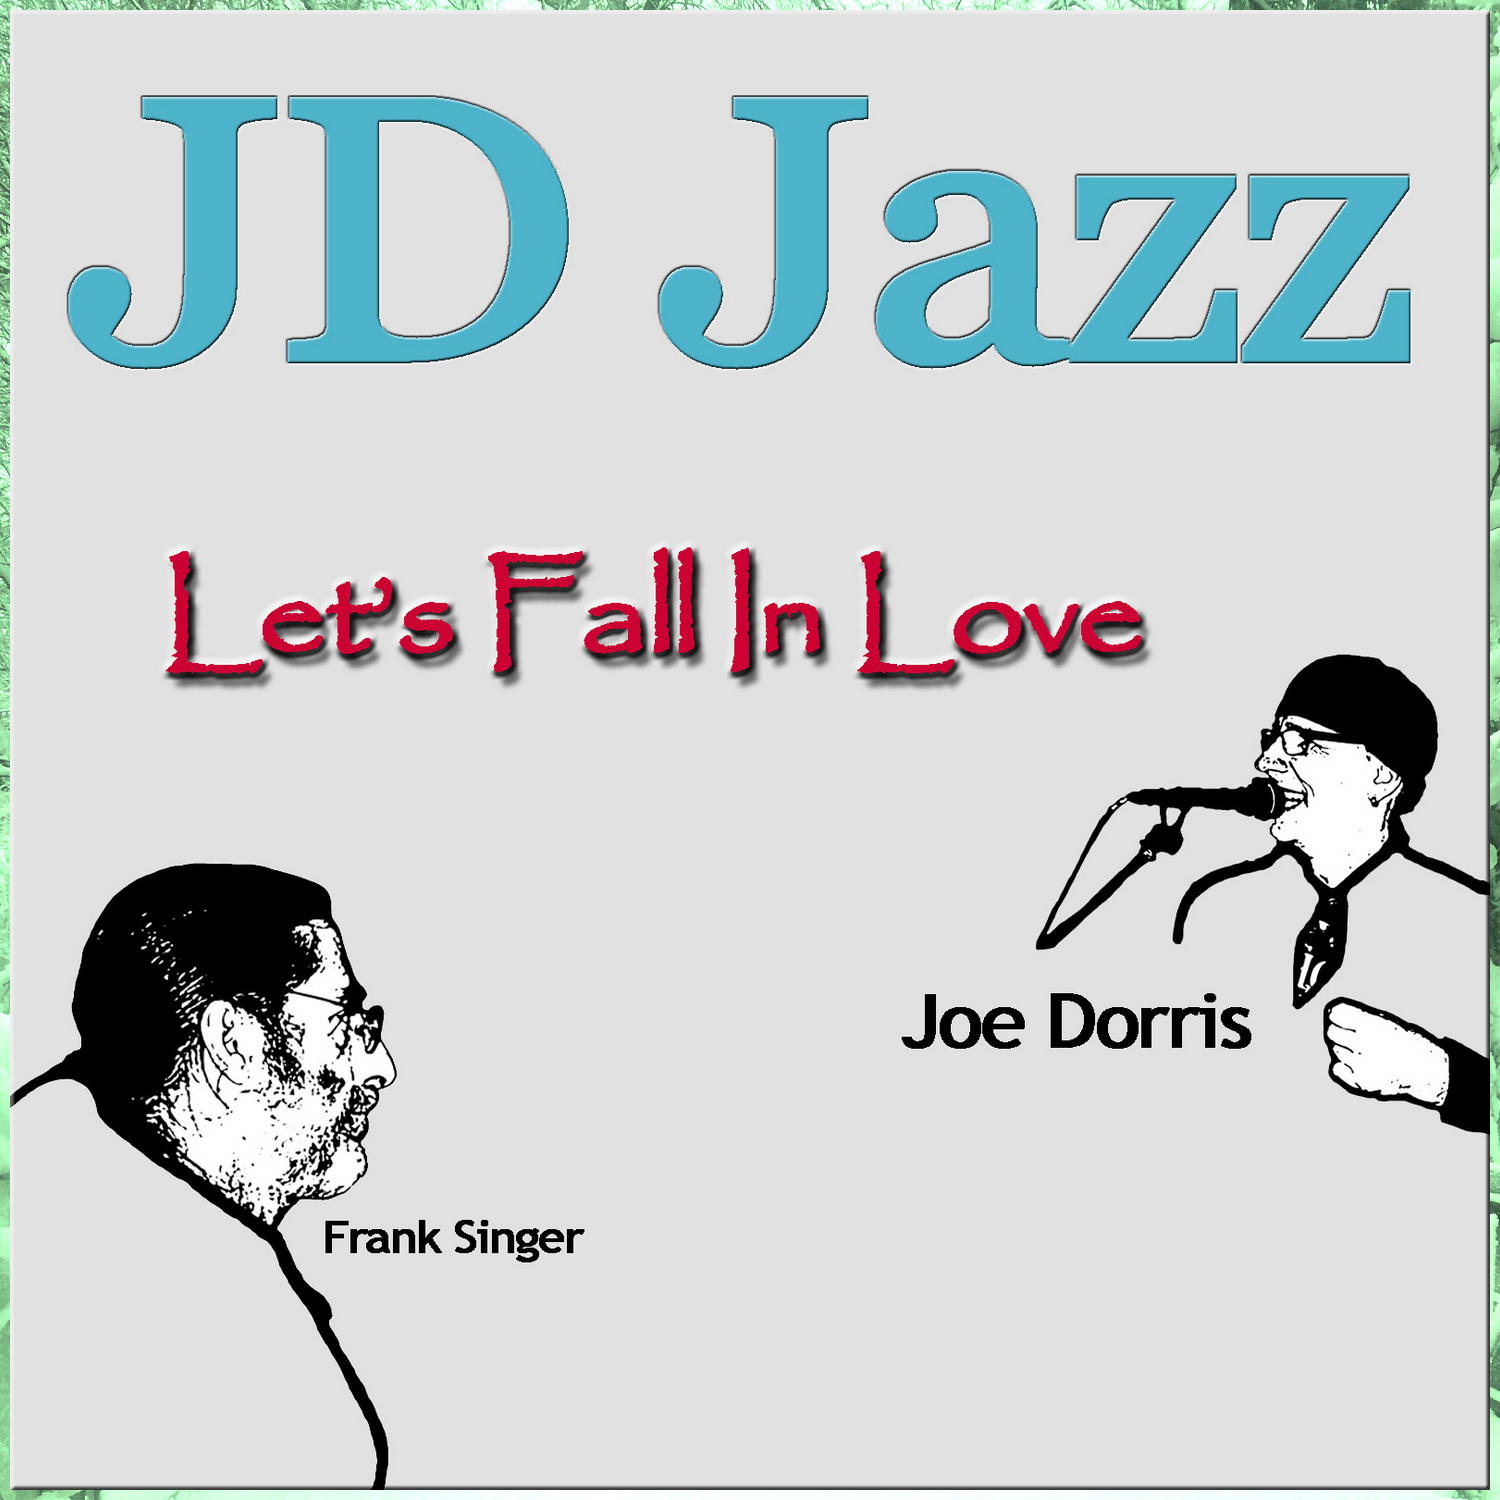 Cats A Bear plays JD Jazz - Lets Fall In Love